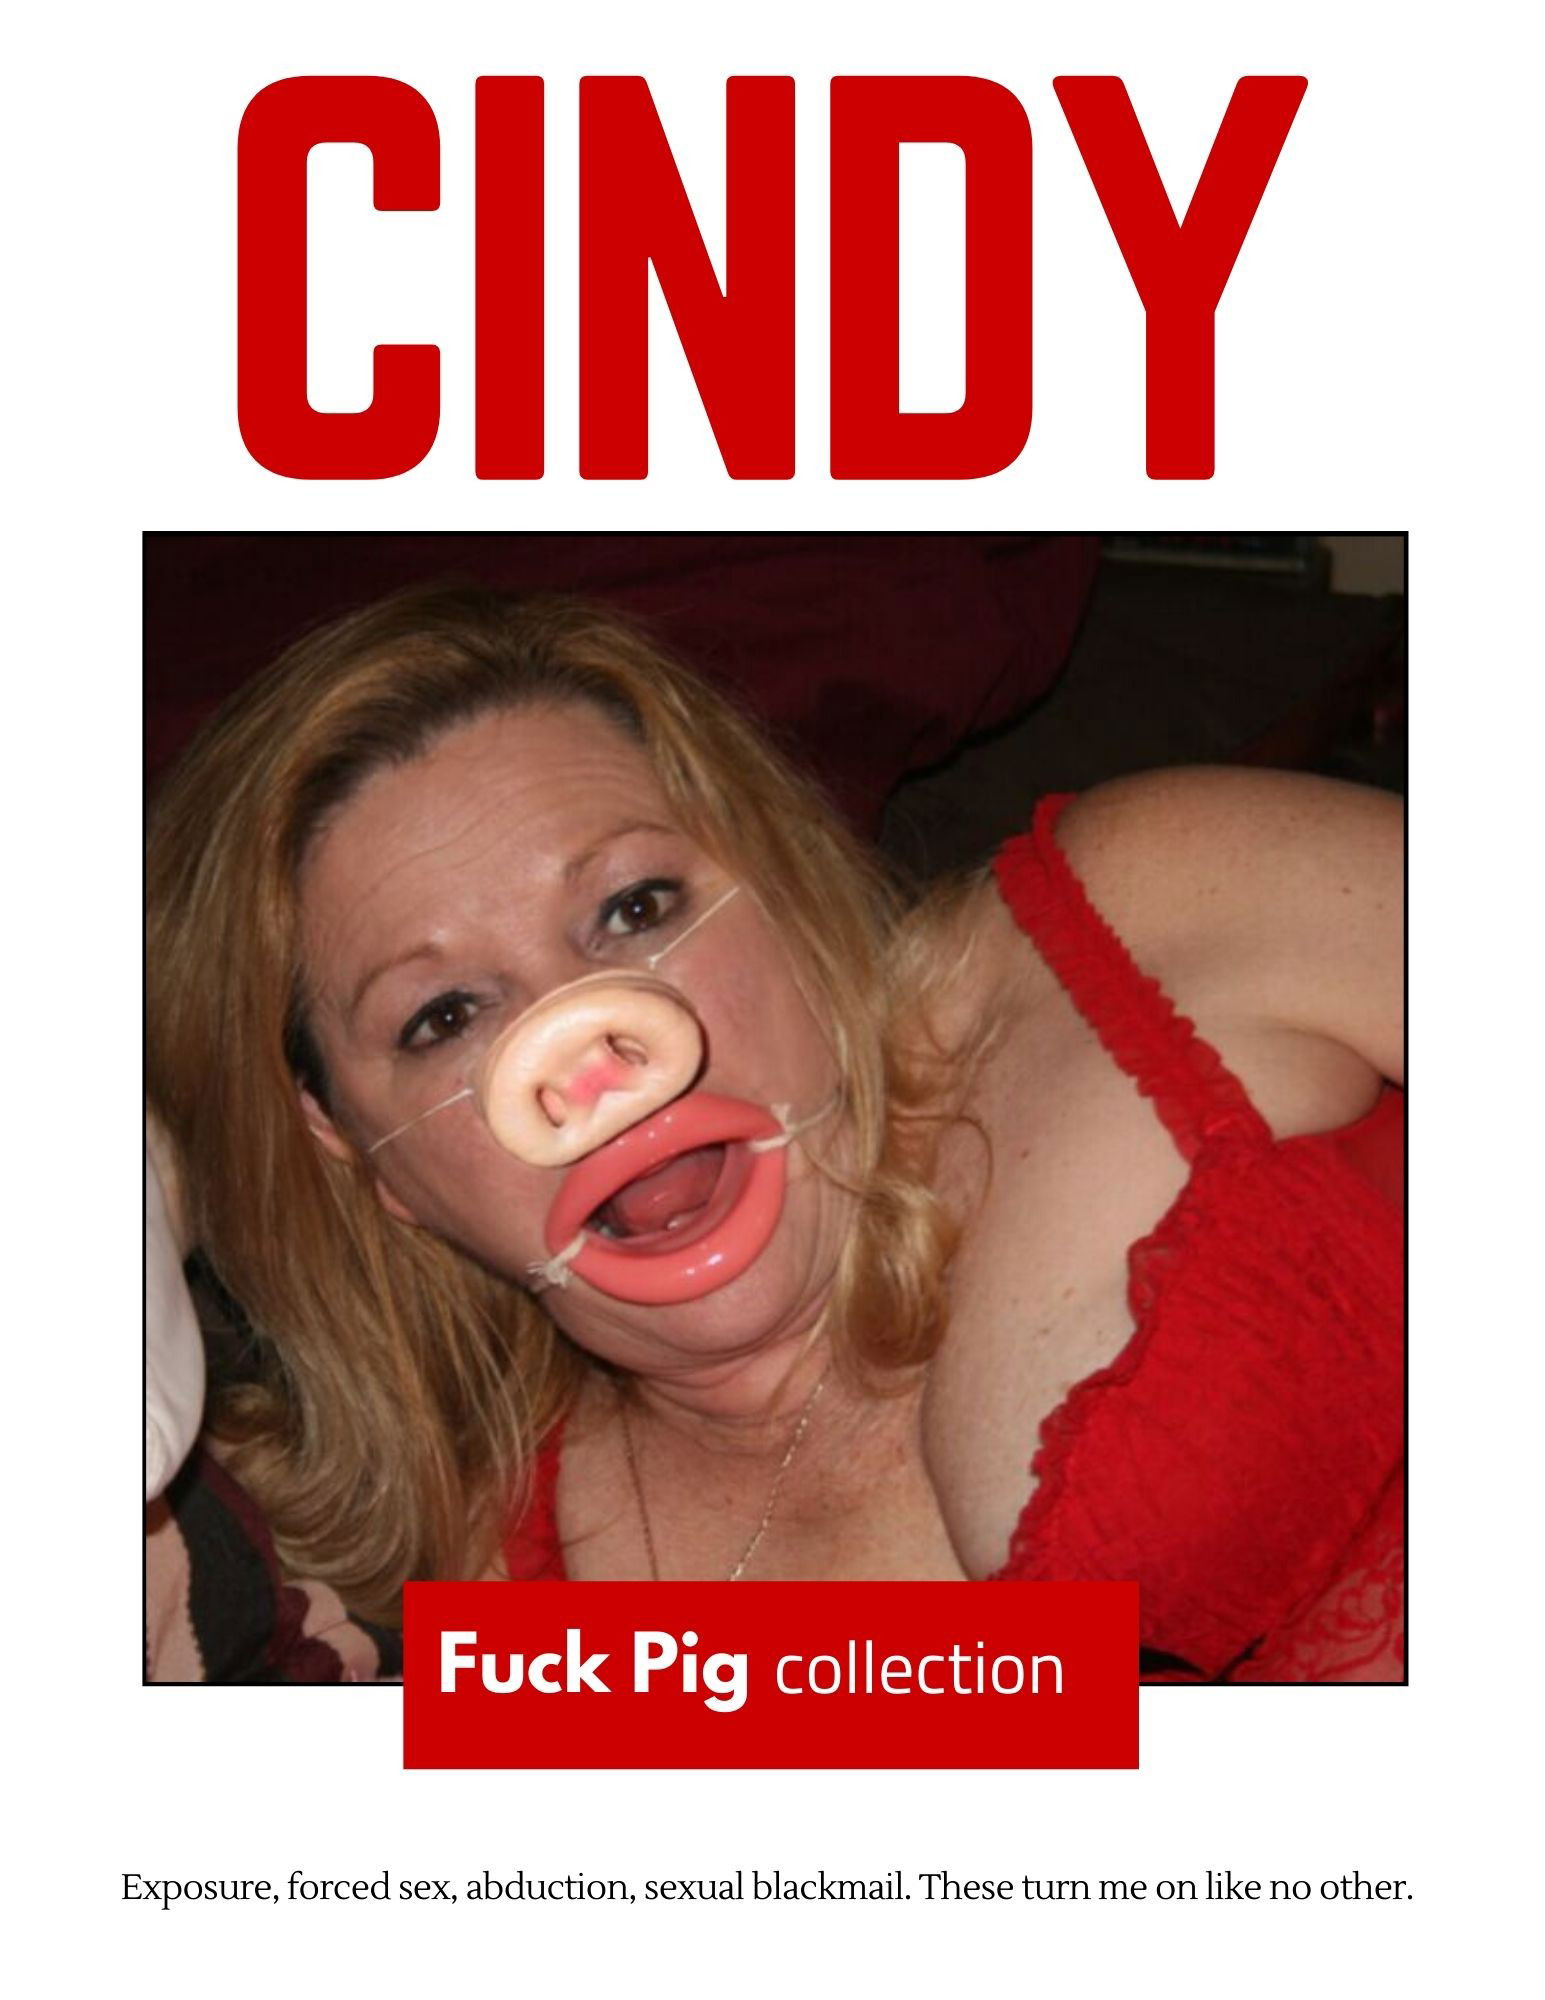 Photo by NaughtyMagazine with the username @NaughtyMagazine,  March 26, 2020 at 11:55 AM. The post is about the topic Fuck Pig Collection